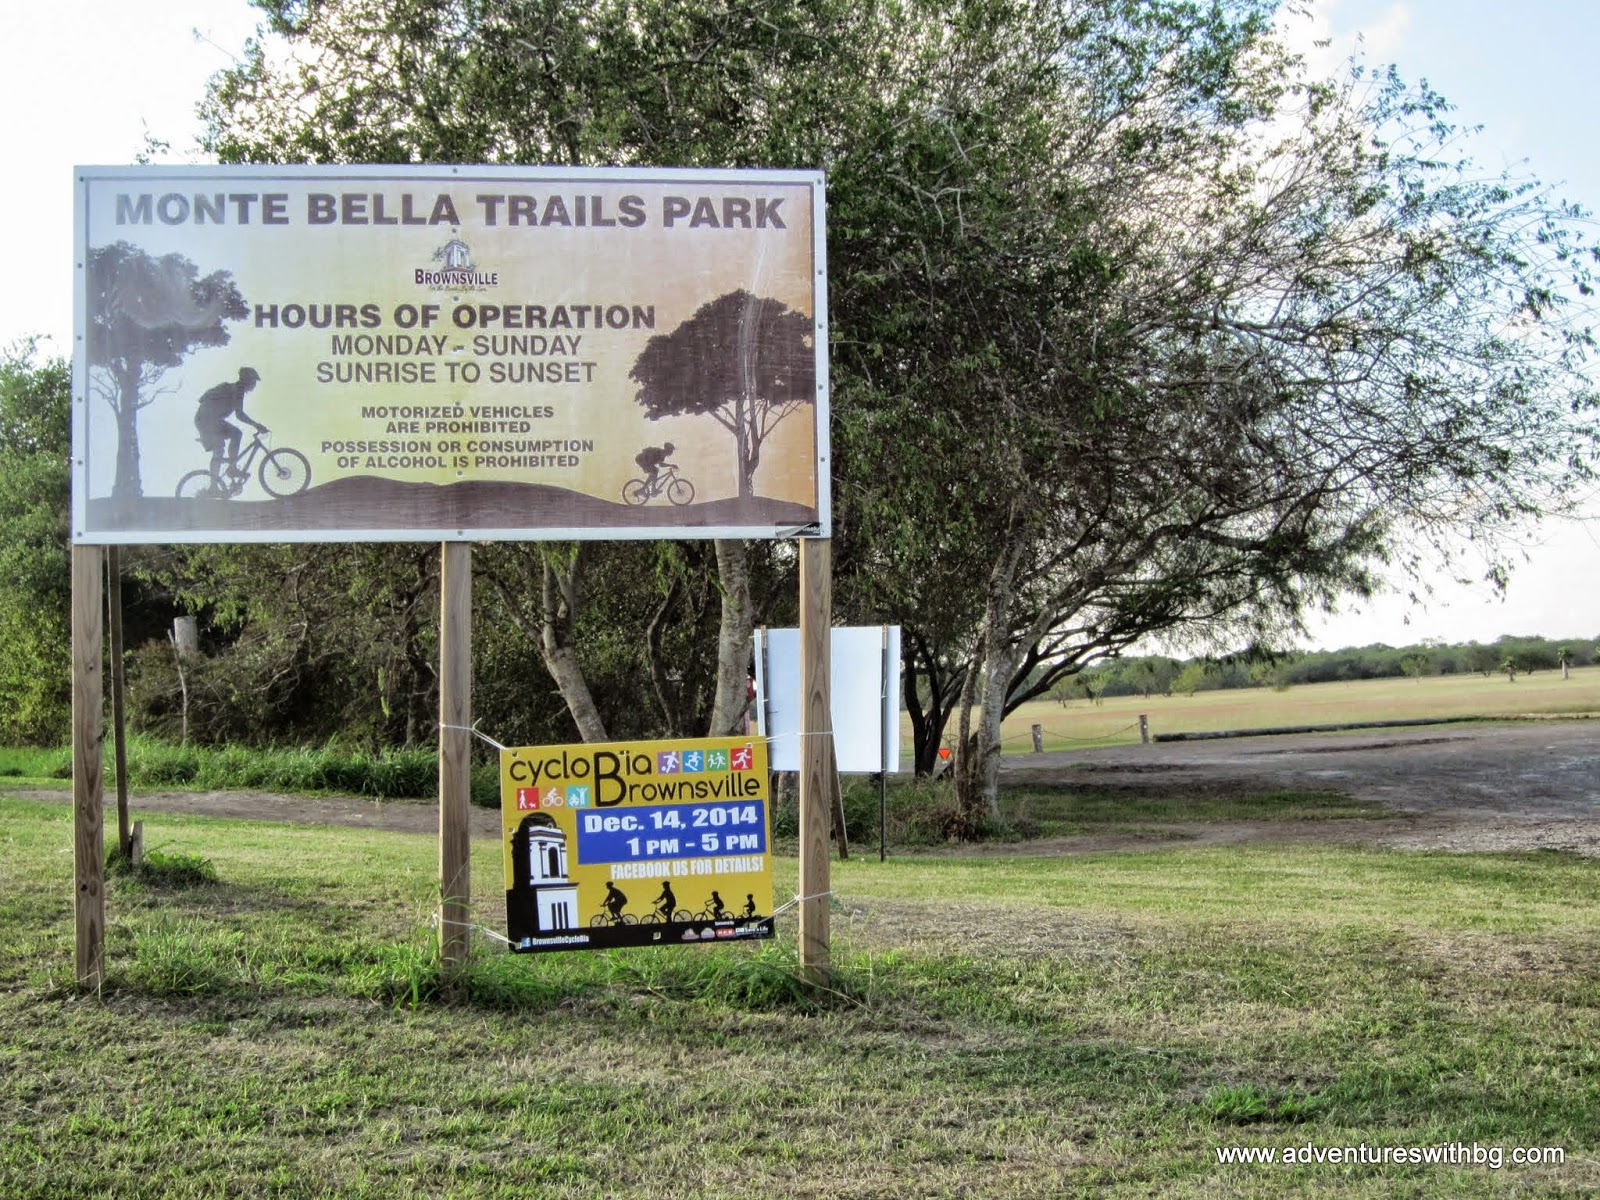 The entrance sign to the Monte Bella Trails Park